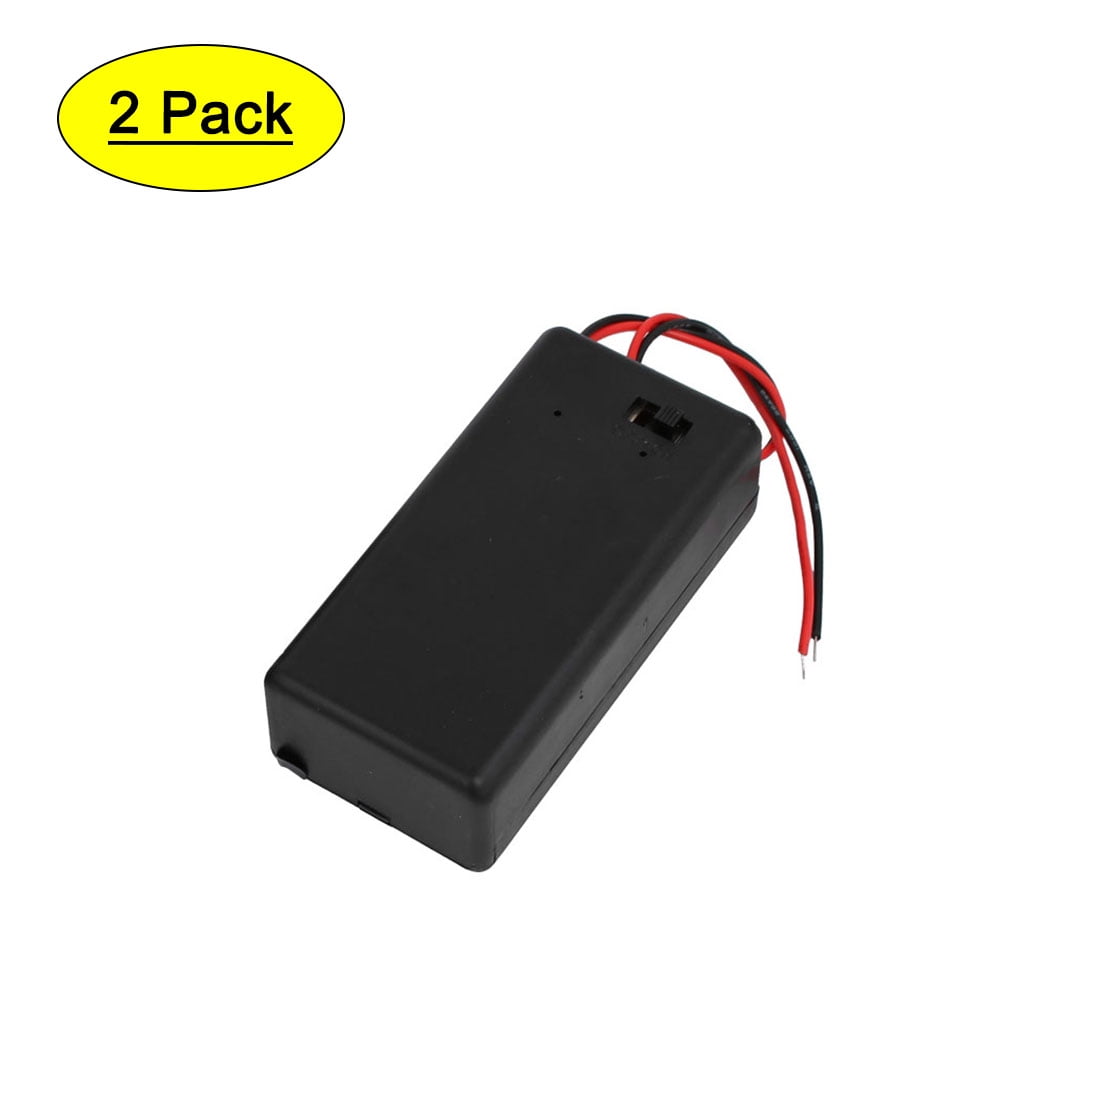 5x SCHOOL electronics SUPPLY 9 volt battery holder with built in switch 9v case